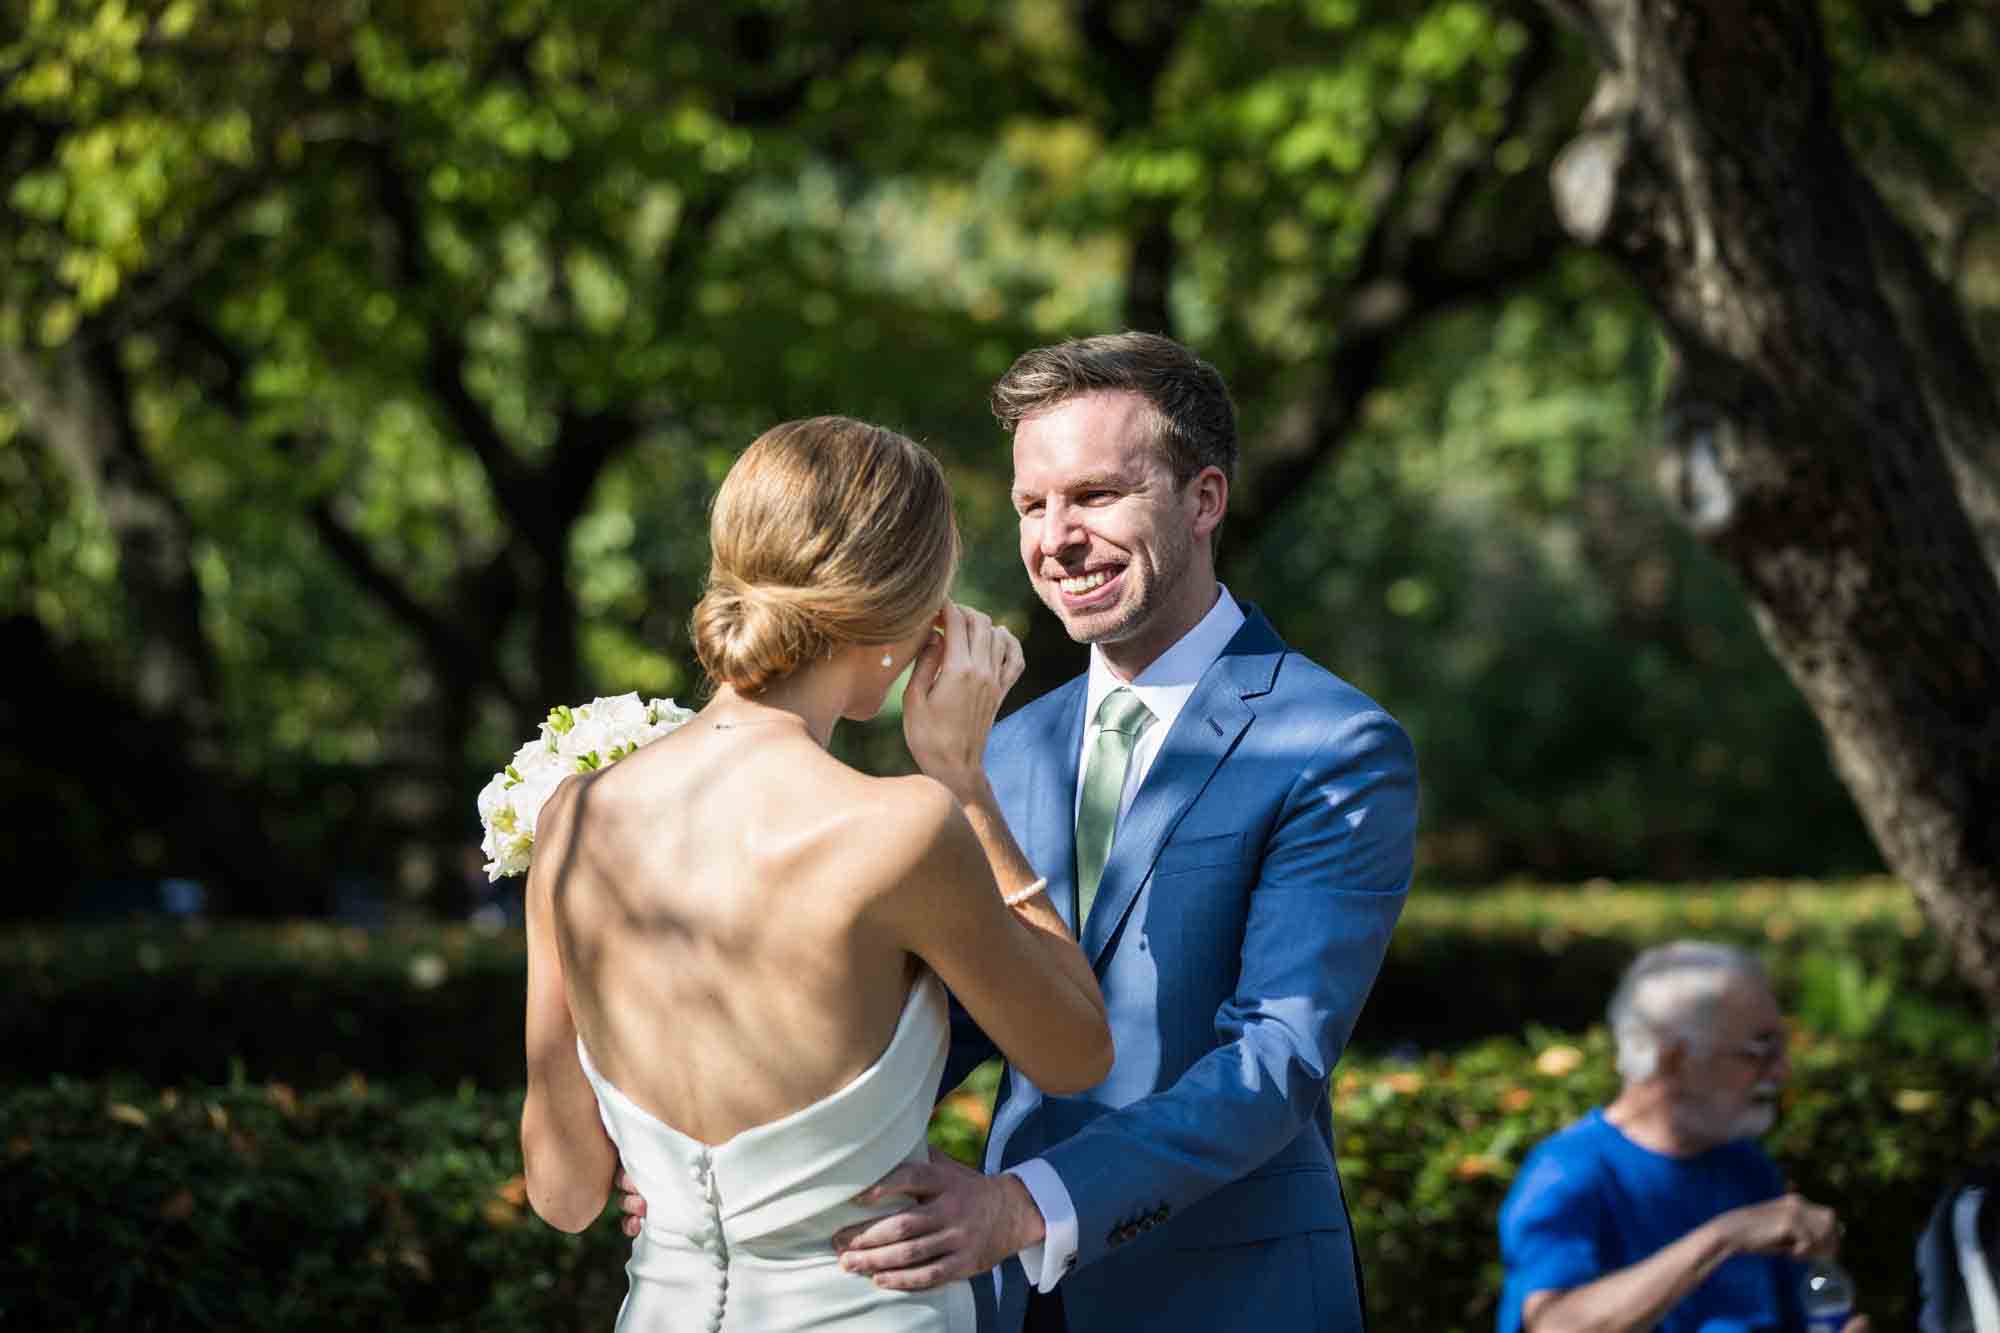 Conservatory Garden wedding photos of groom seeing bride for first time during first look